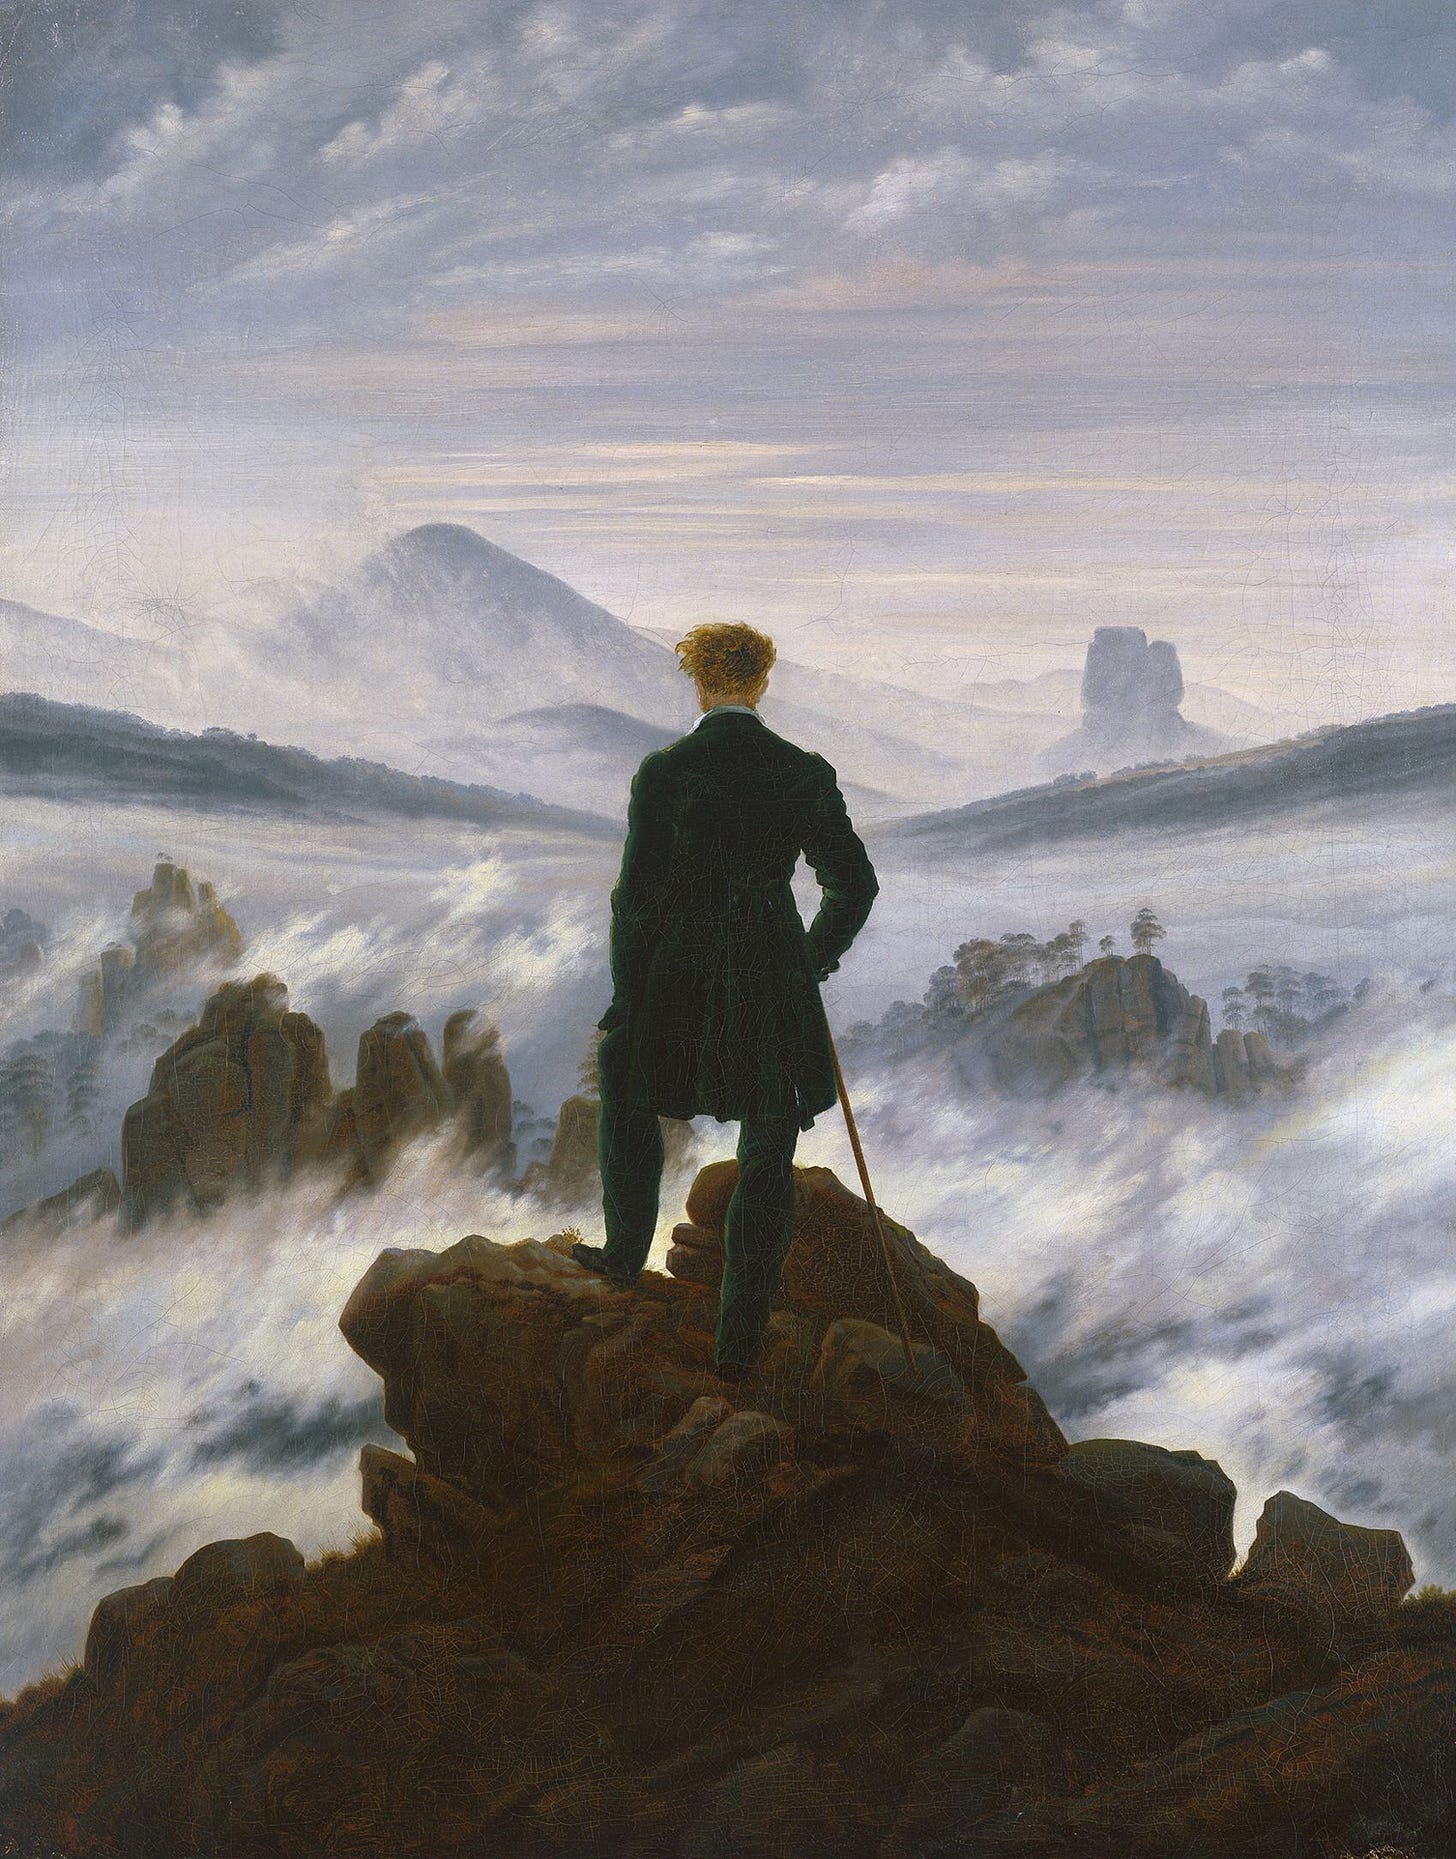 Perhaps Friedrich's best known work, the oil painting "Wanderer Above the Sea of Fog" is currently on display at Hamburg’s Kunsthalle.